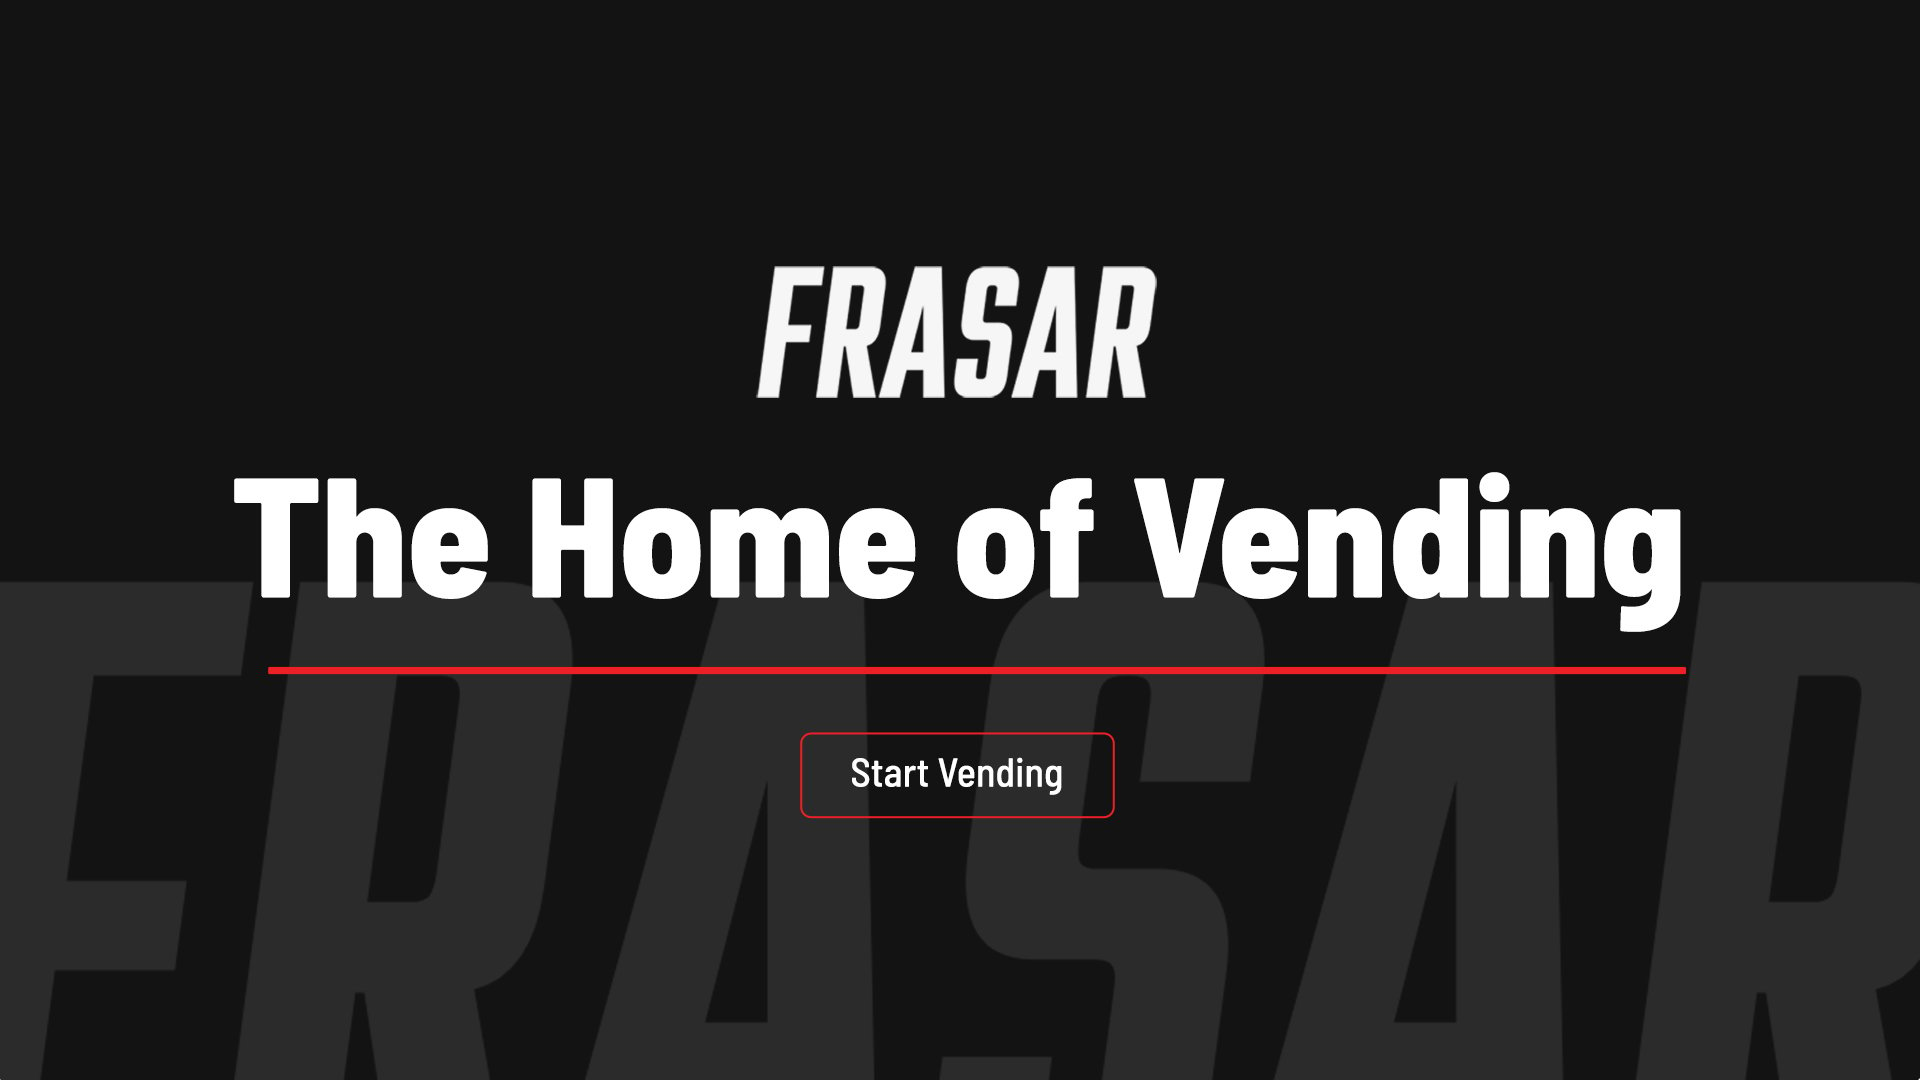 Let Frasar help your business understand the potential gains from industrial vending applications